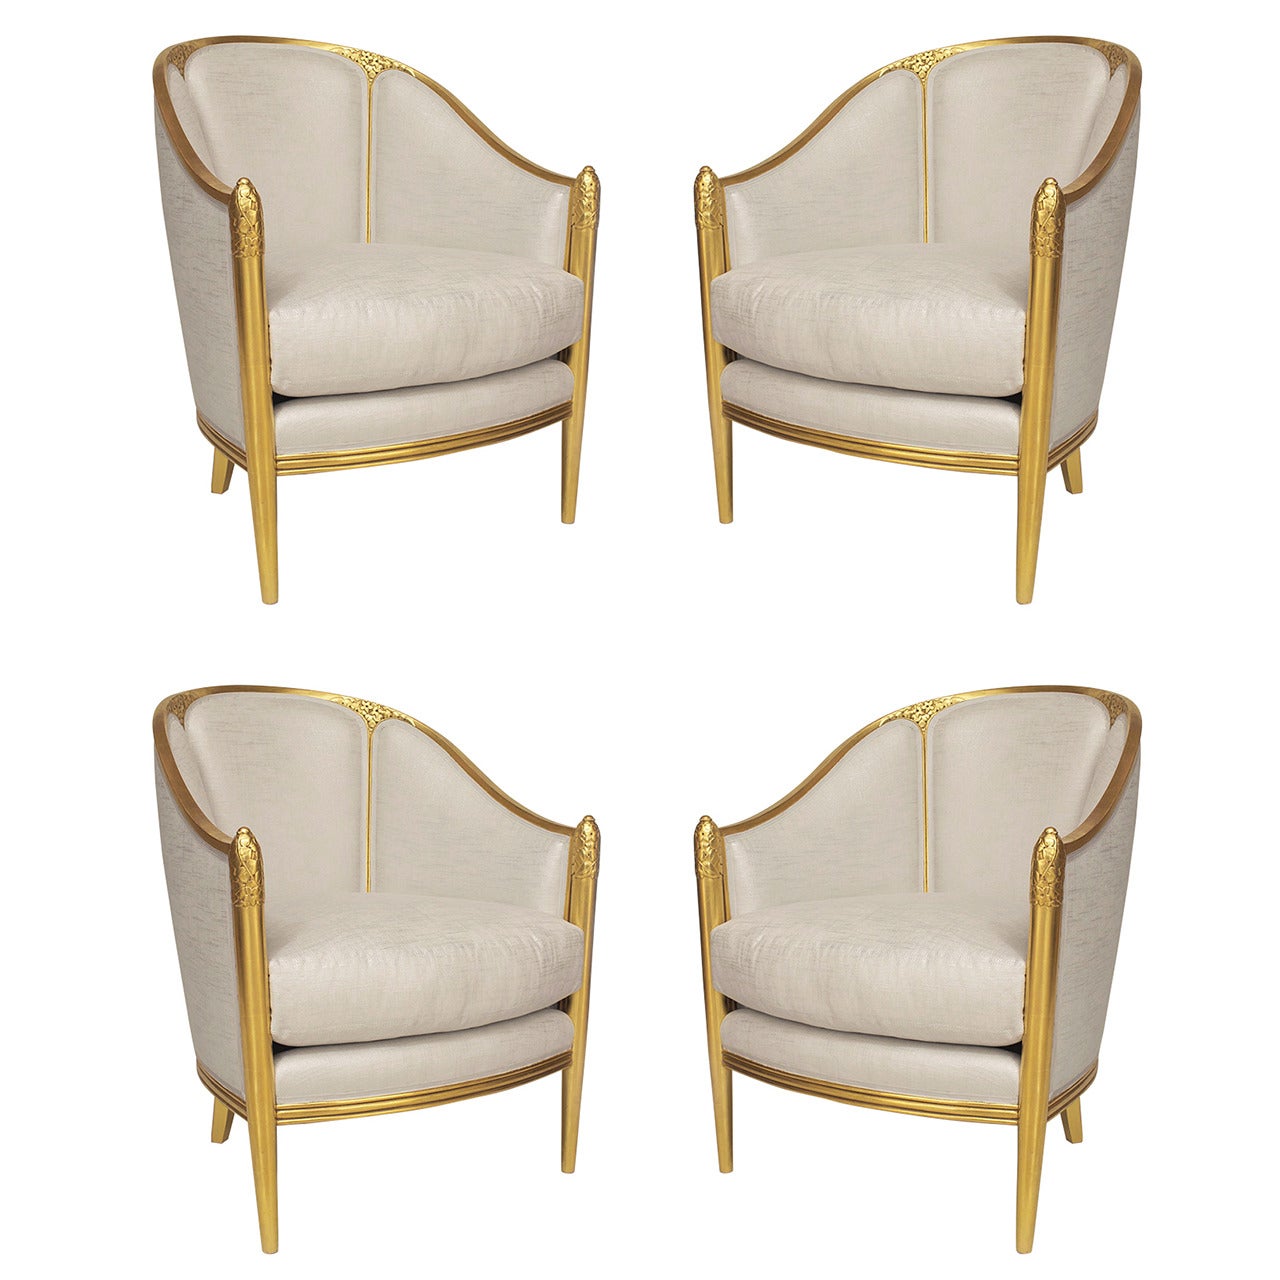 Two Pairs of French Art Deco Club Chairs Attributed to Follet